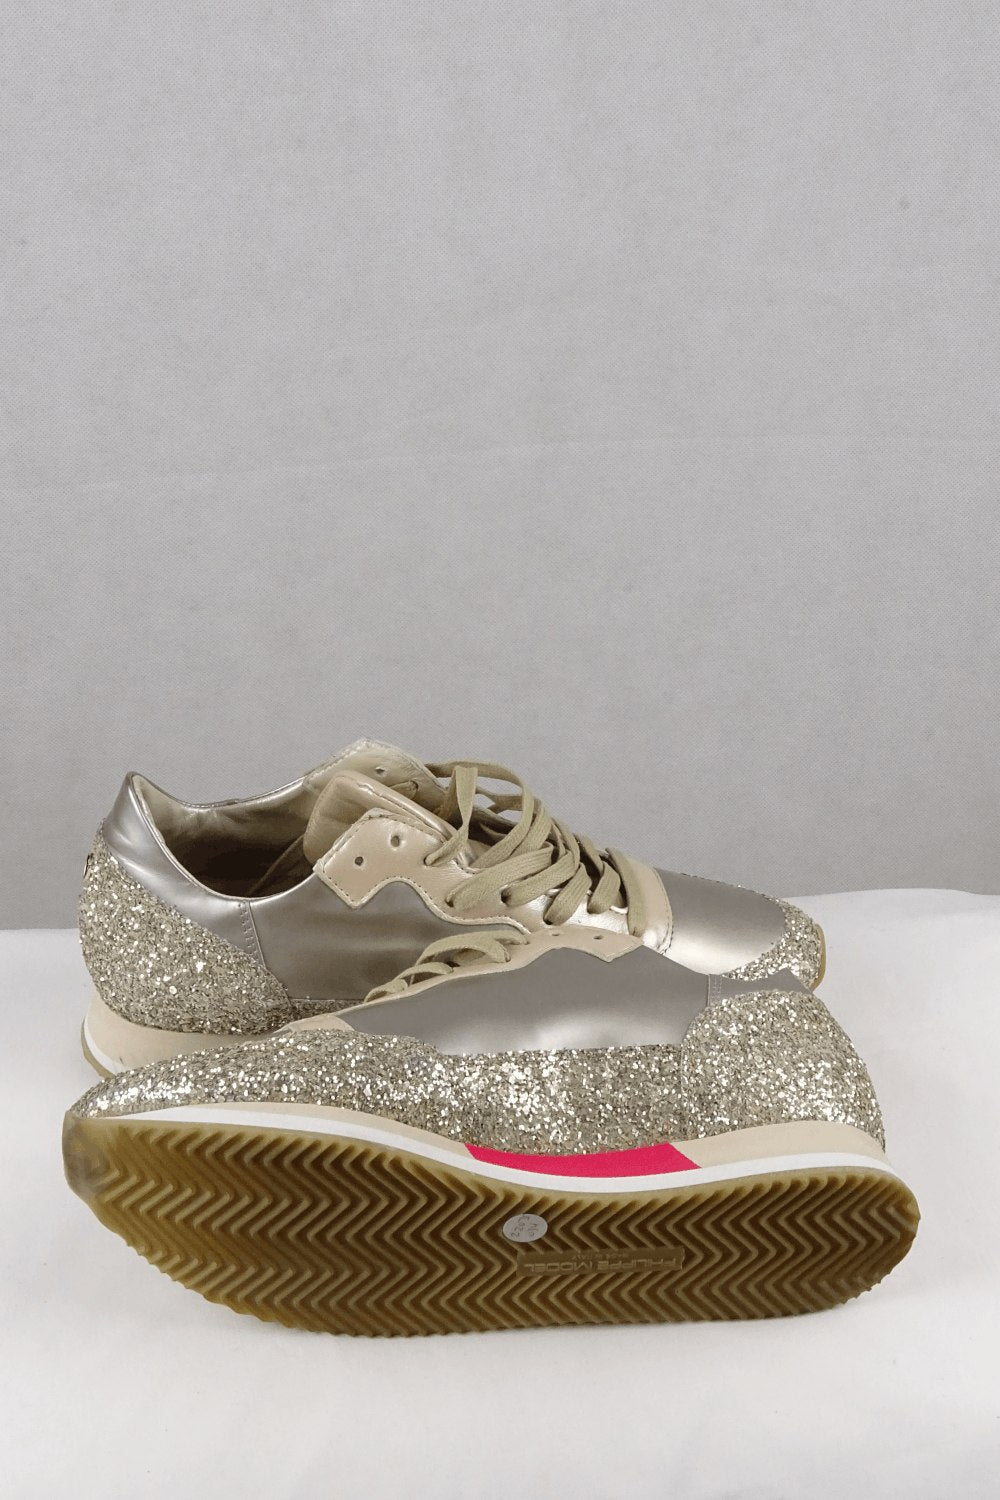 Phillippe Model Gold Sparkle Sneakers 41